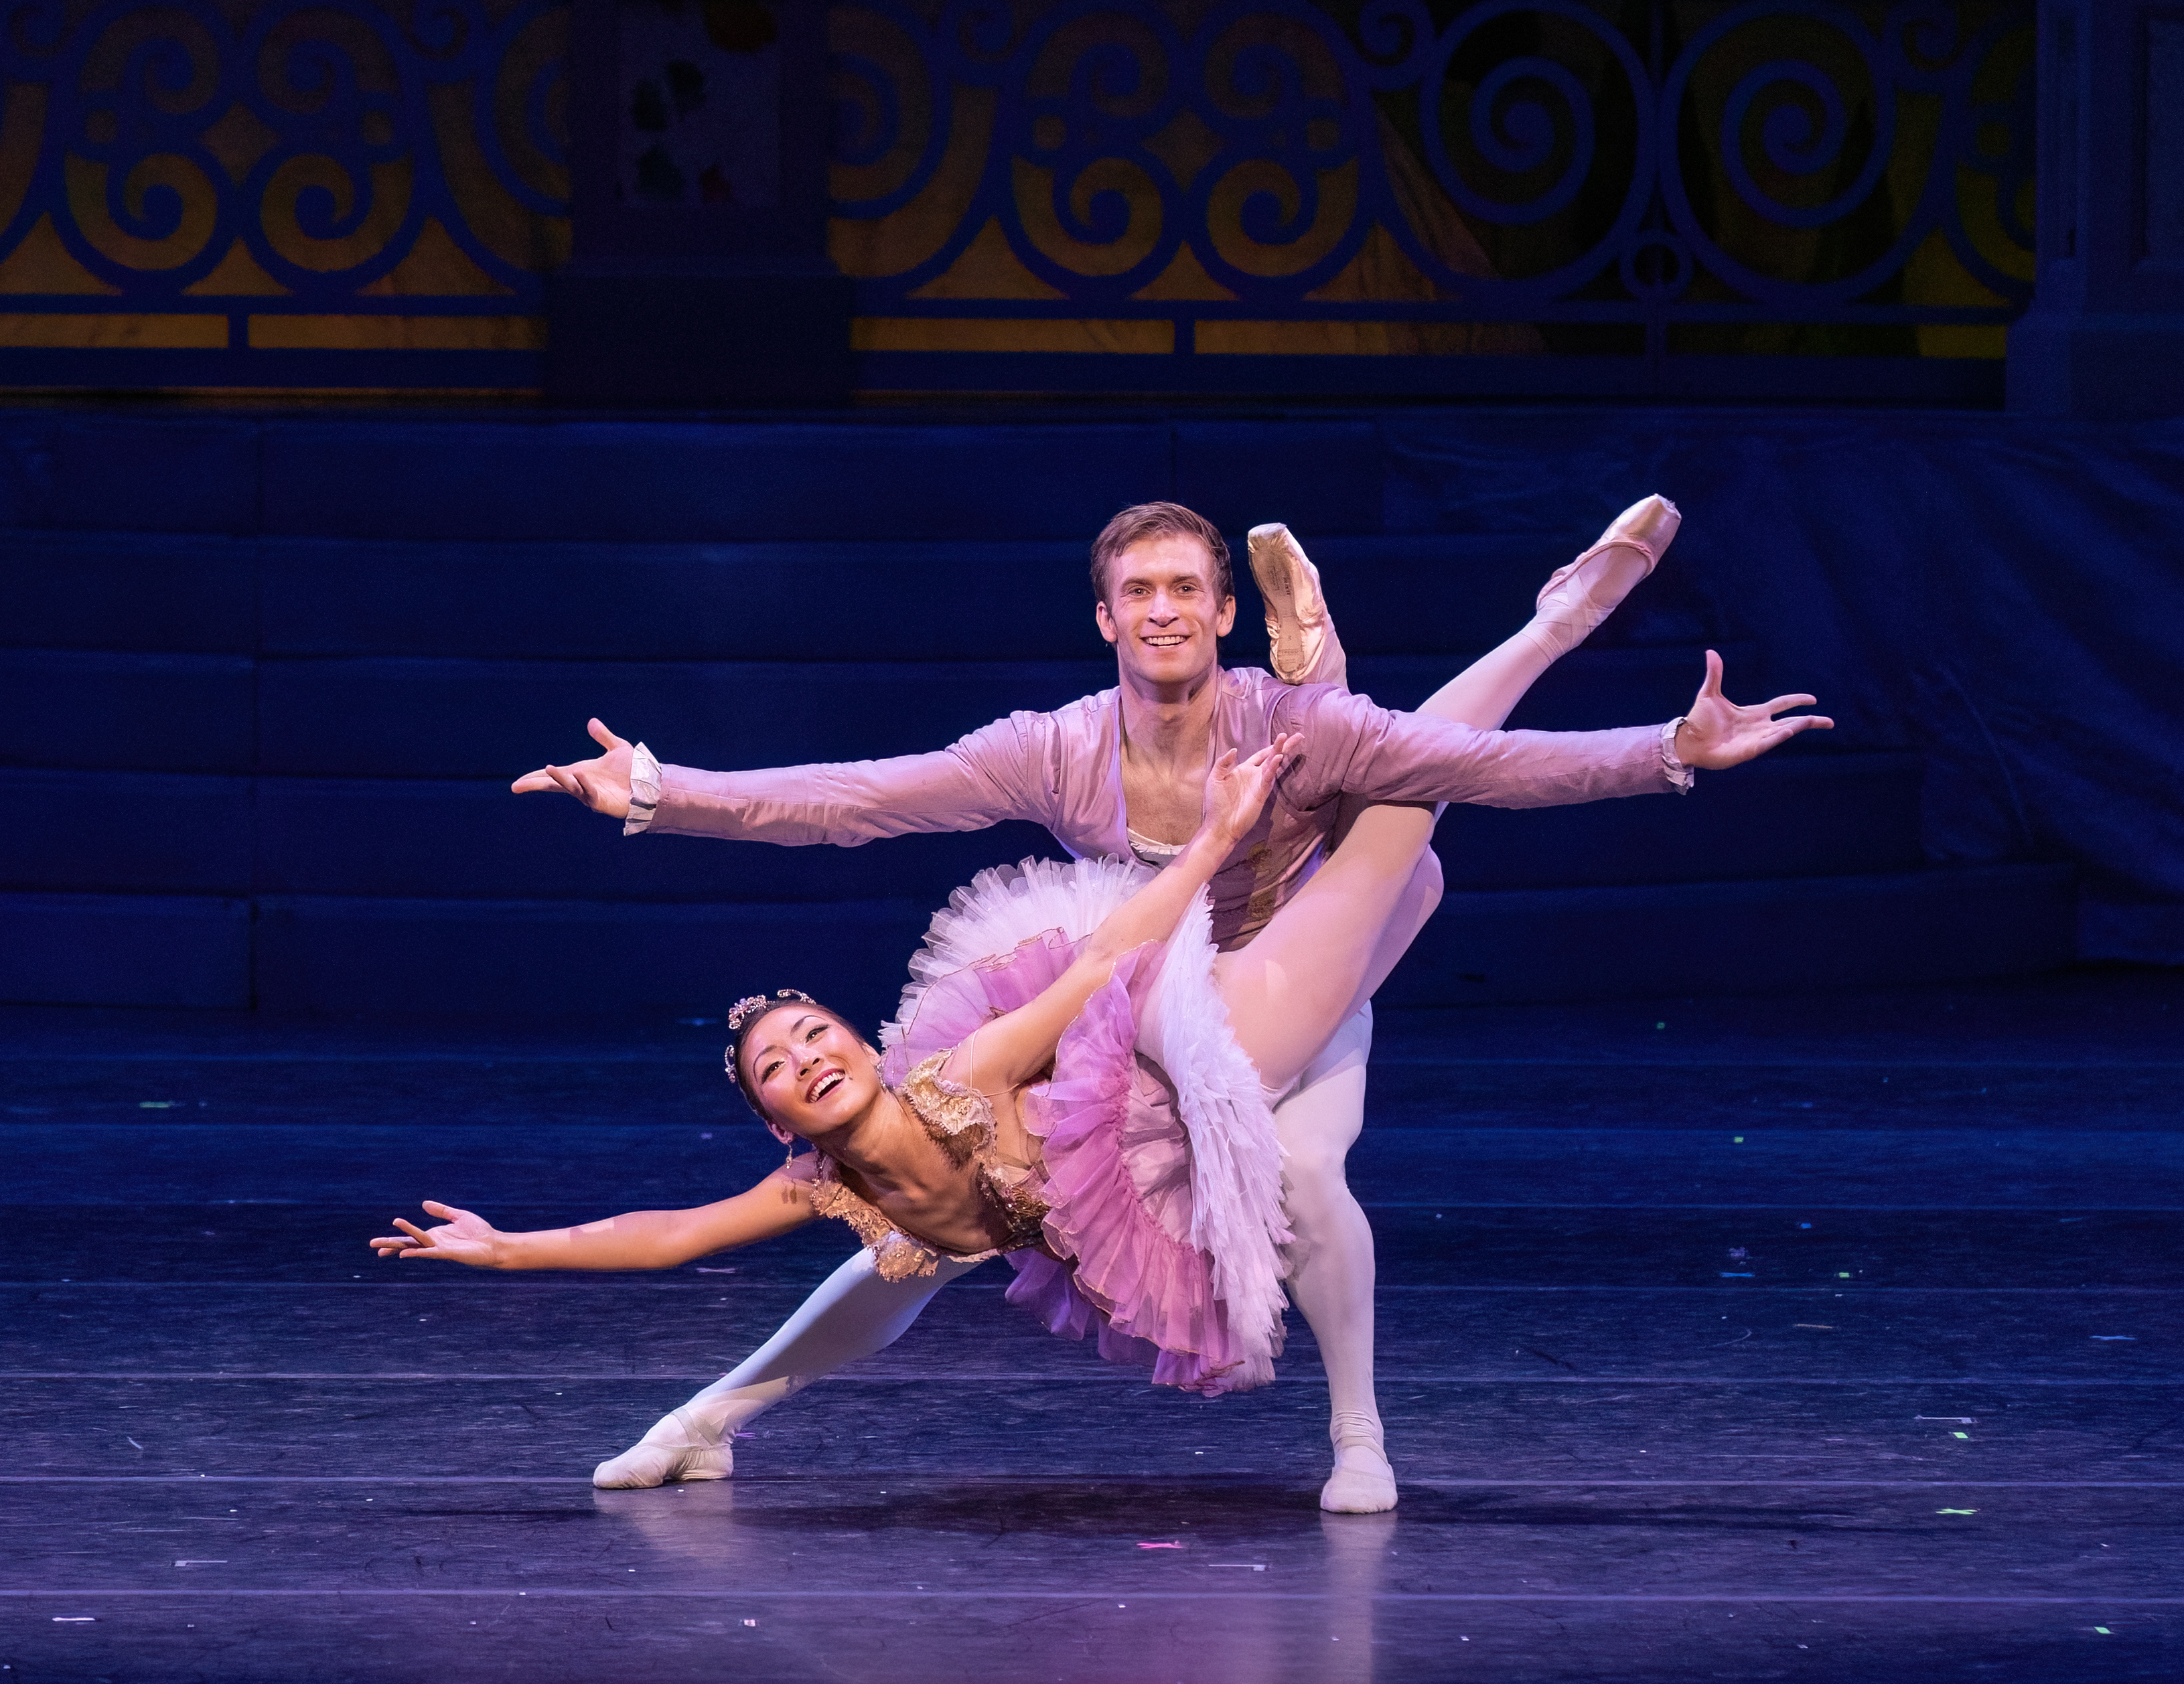 CRACKING THE CODE: Ballet’s seasonal offering has become local favorite